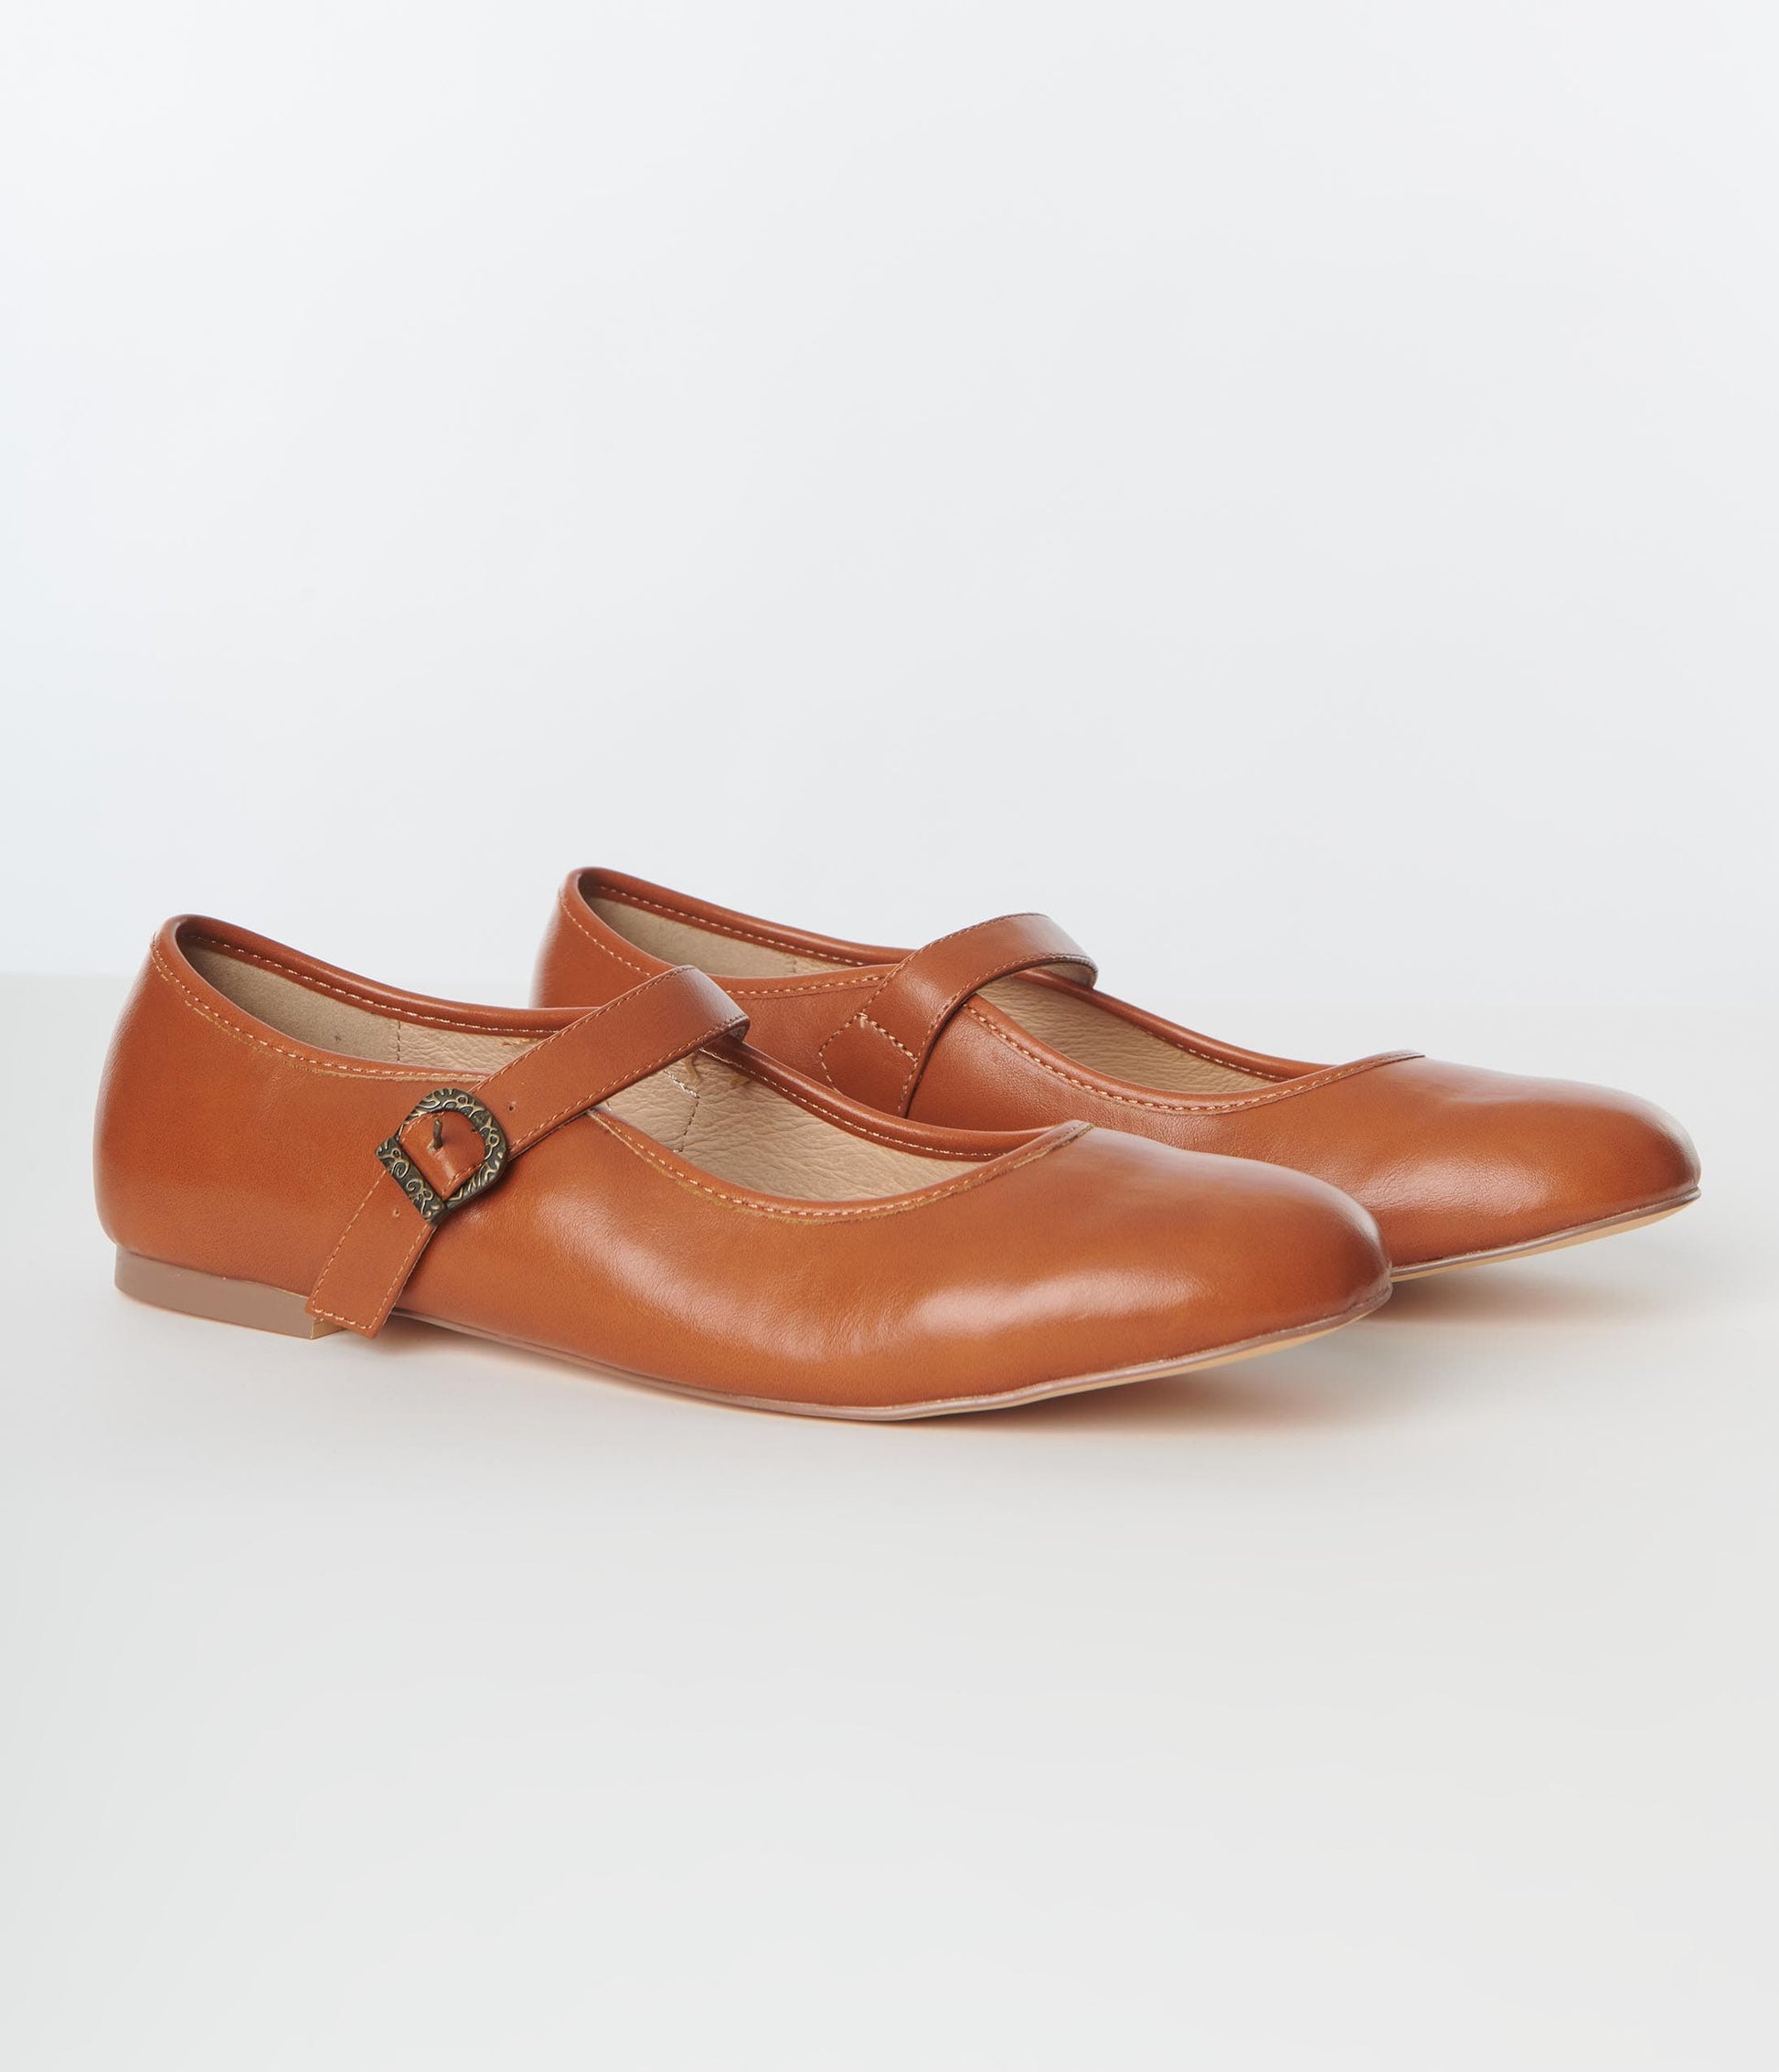 Chelsea Crew Brown Leatherette Mary Jane Flats